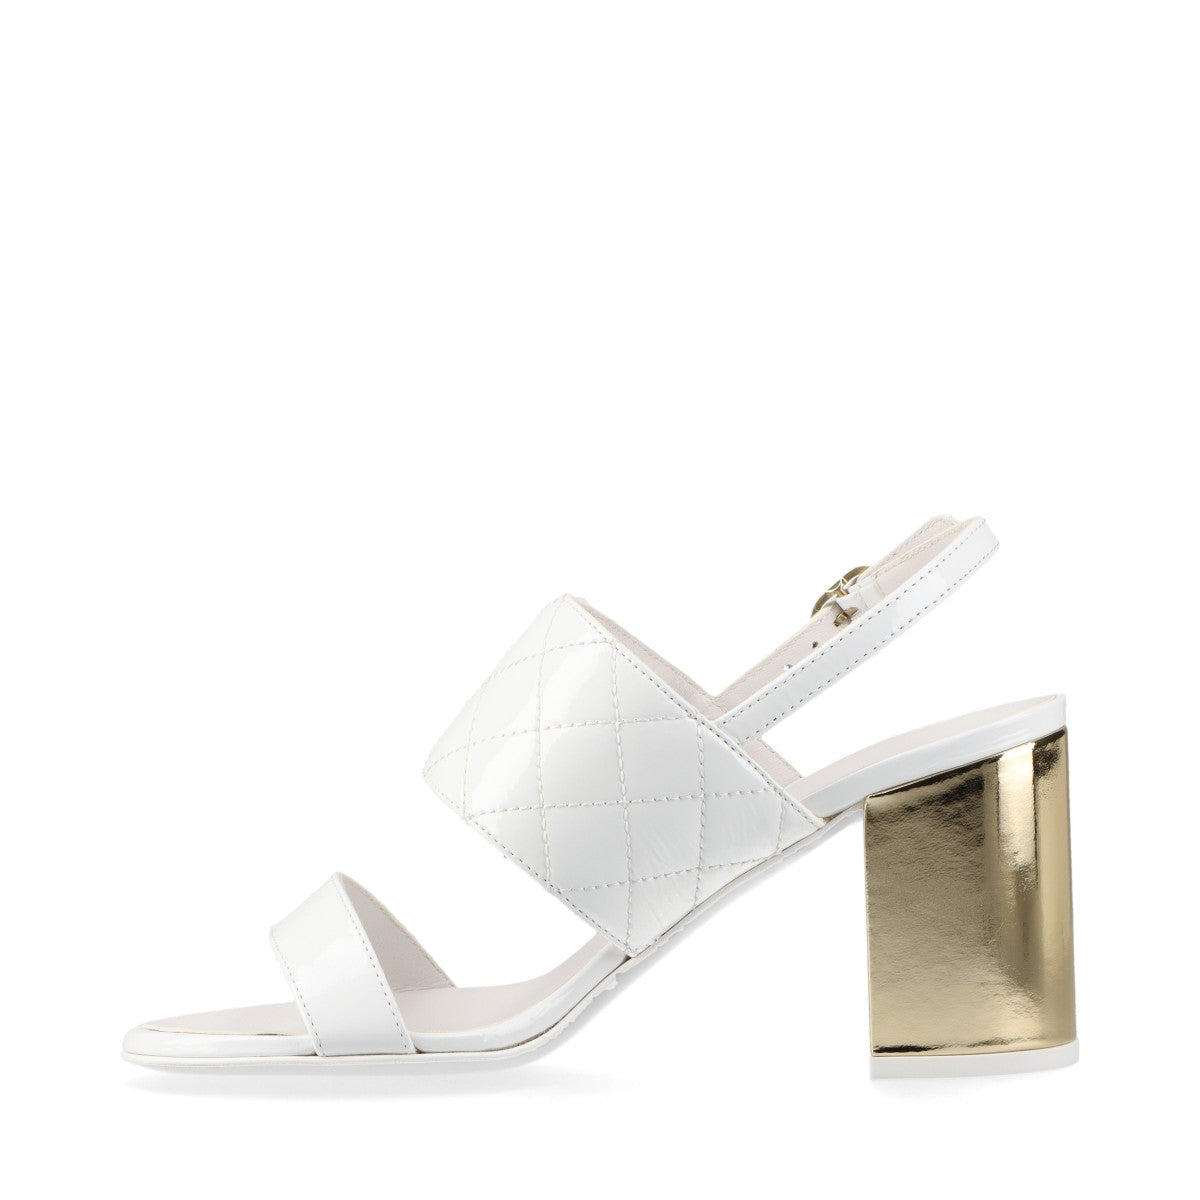 Chanel Coco Mark 23P Patent Leather Sandals 35C Ladies' White x gold G39730 Matelasse Strap Box There is a storage bag